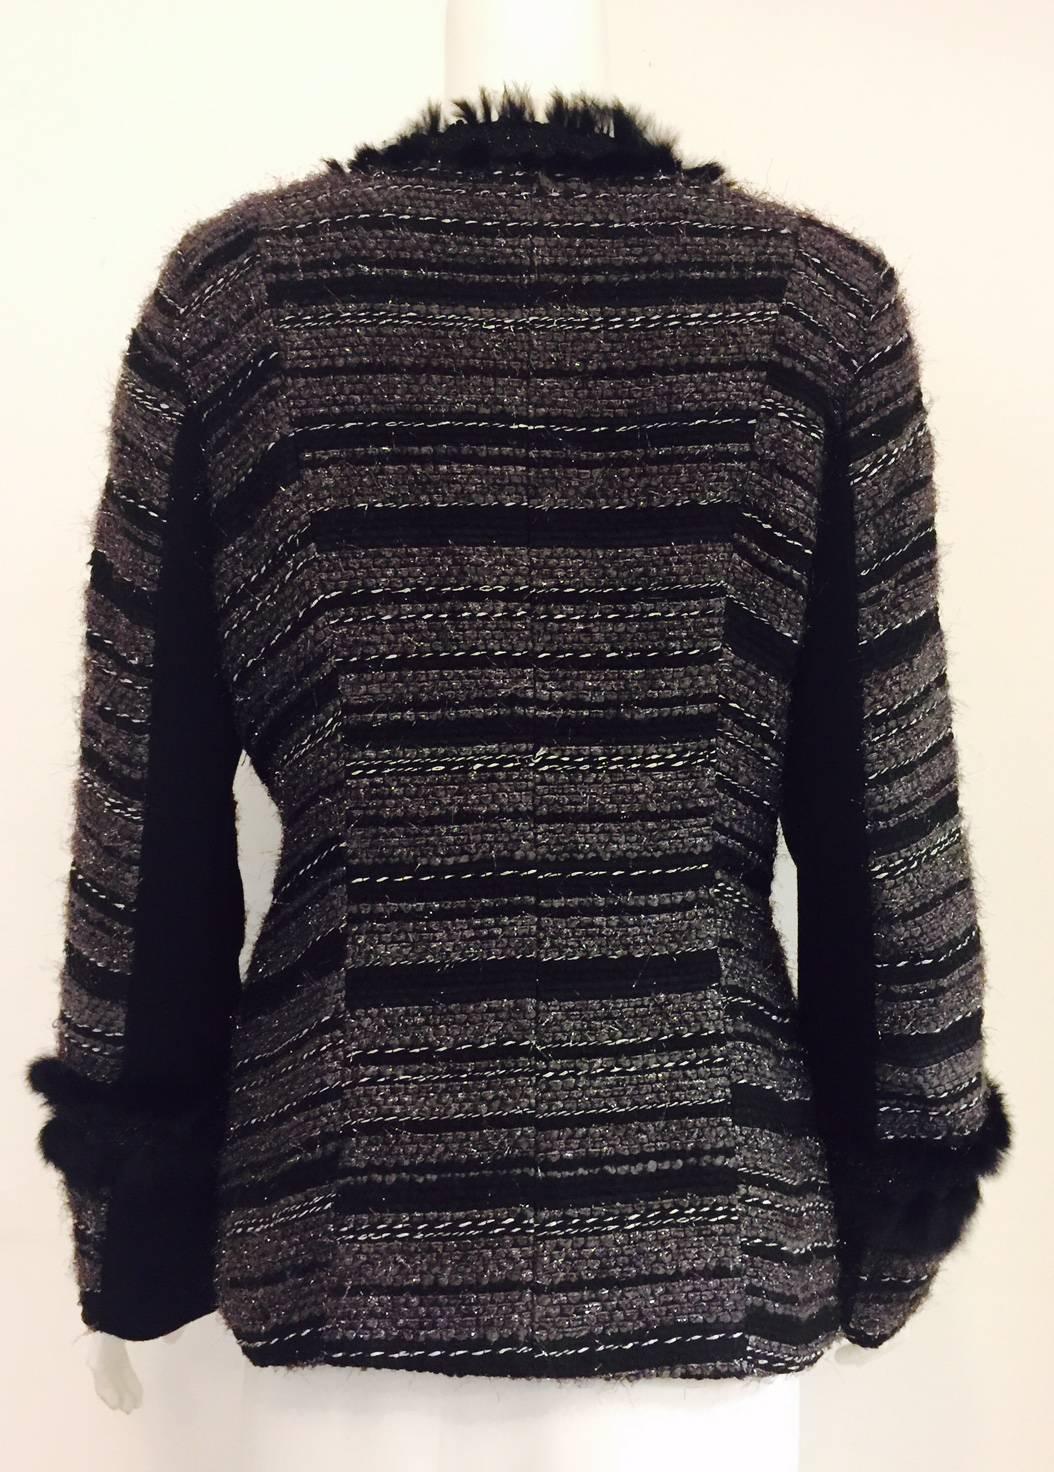 Neiman Marcus Black & Grey Boucle Jacket with Metallic Threads Overall In New Condition For Sale In Palm Beach, FL